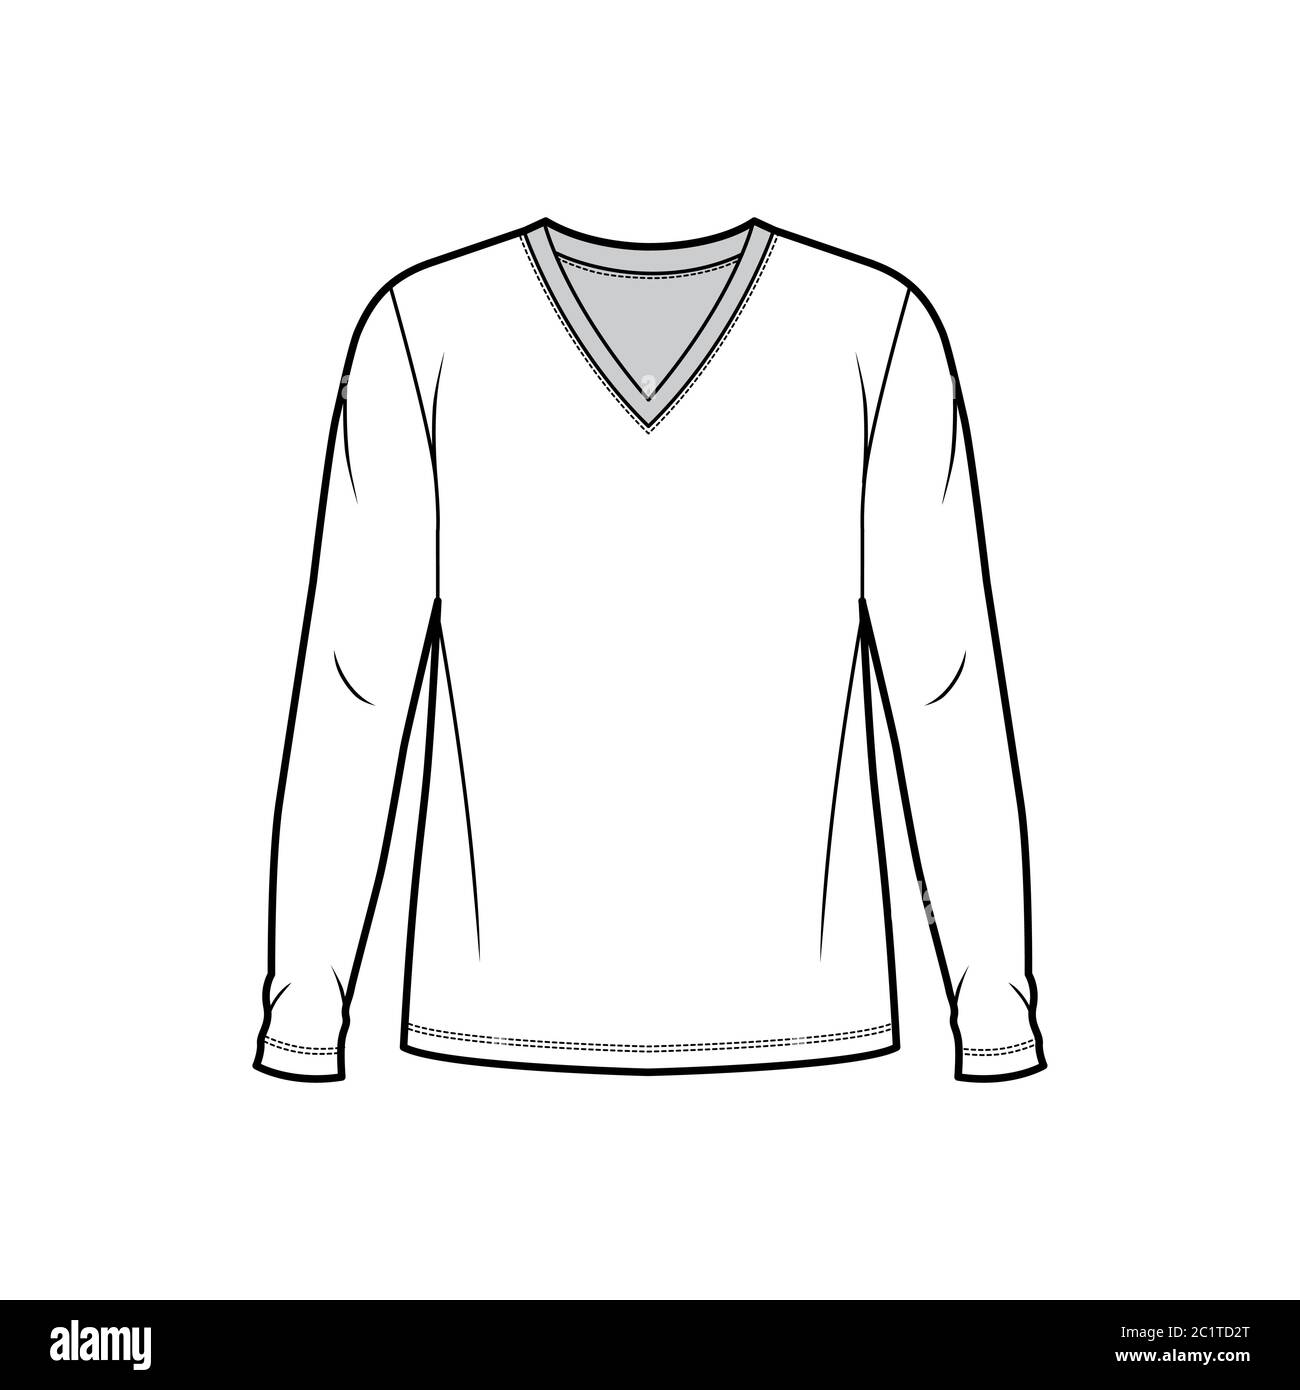 Cotton jersey top technical fashion illustration with V neck, tunic length oversized body long sleeves flat. Apparel template front, white color. Women and men unisex garment mockup for designer. Stock Vector